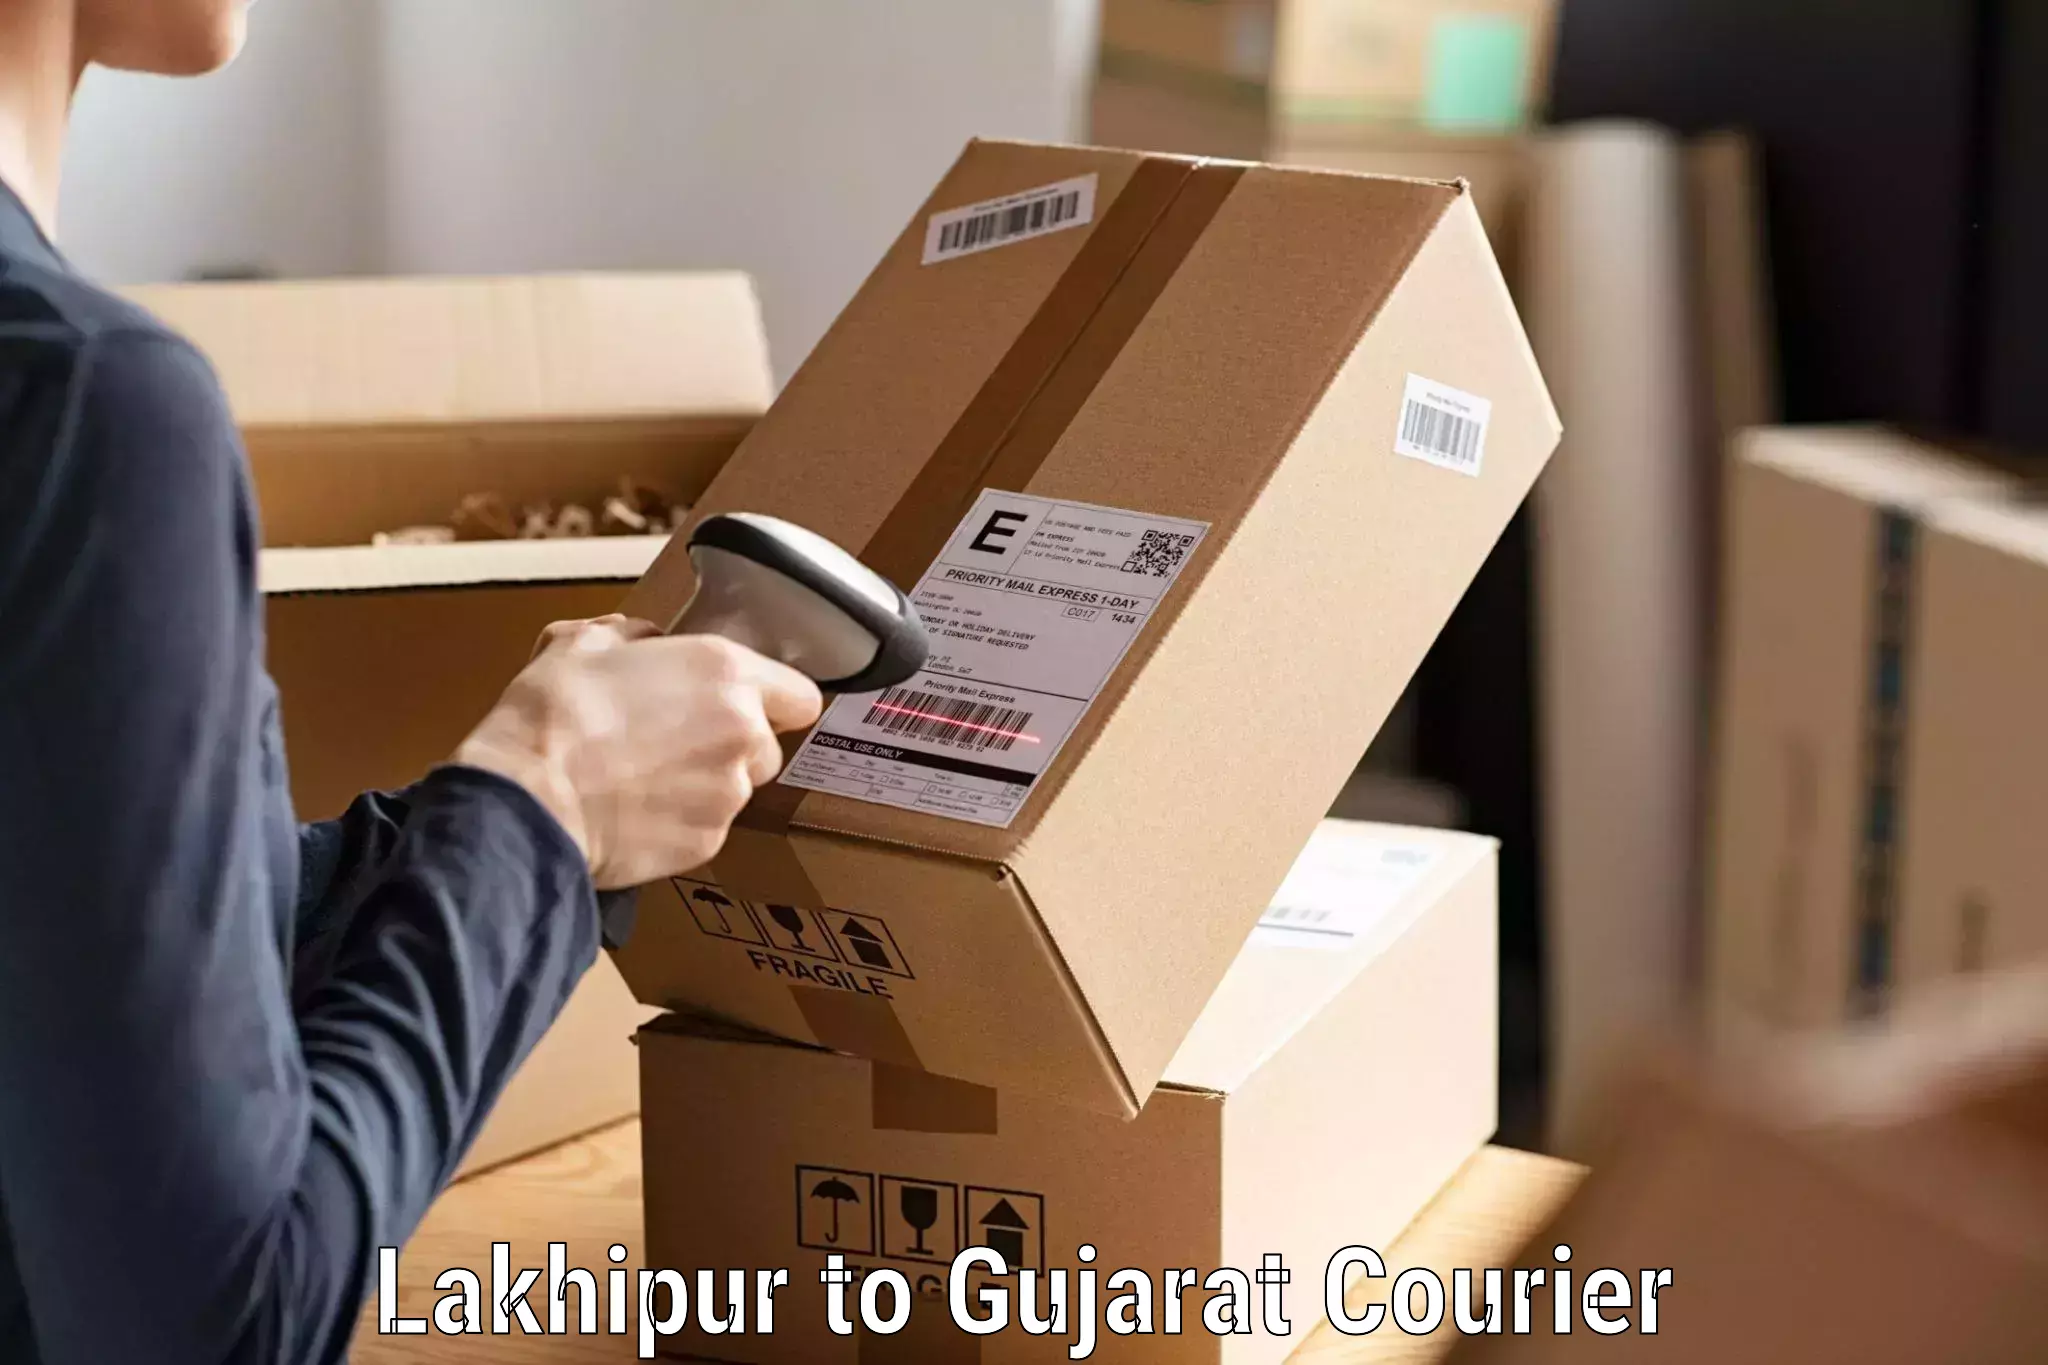 On-call courier service Lakhipur to Tarapur